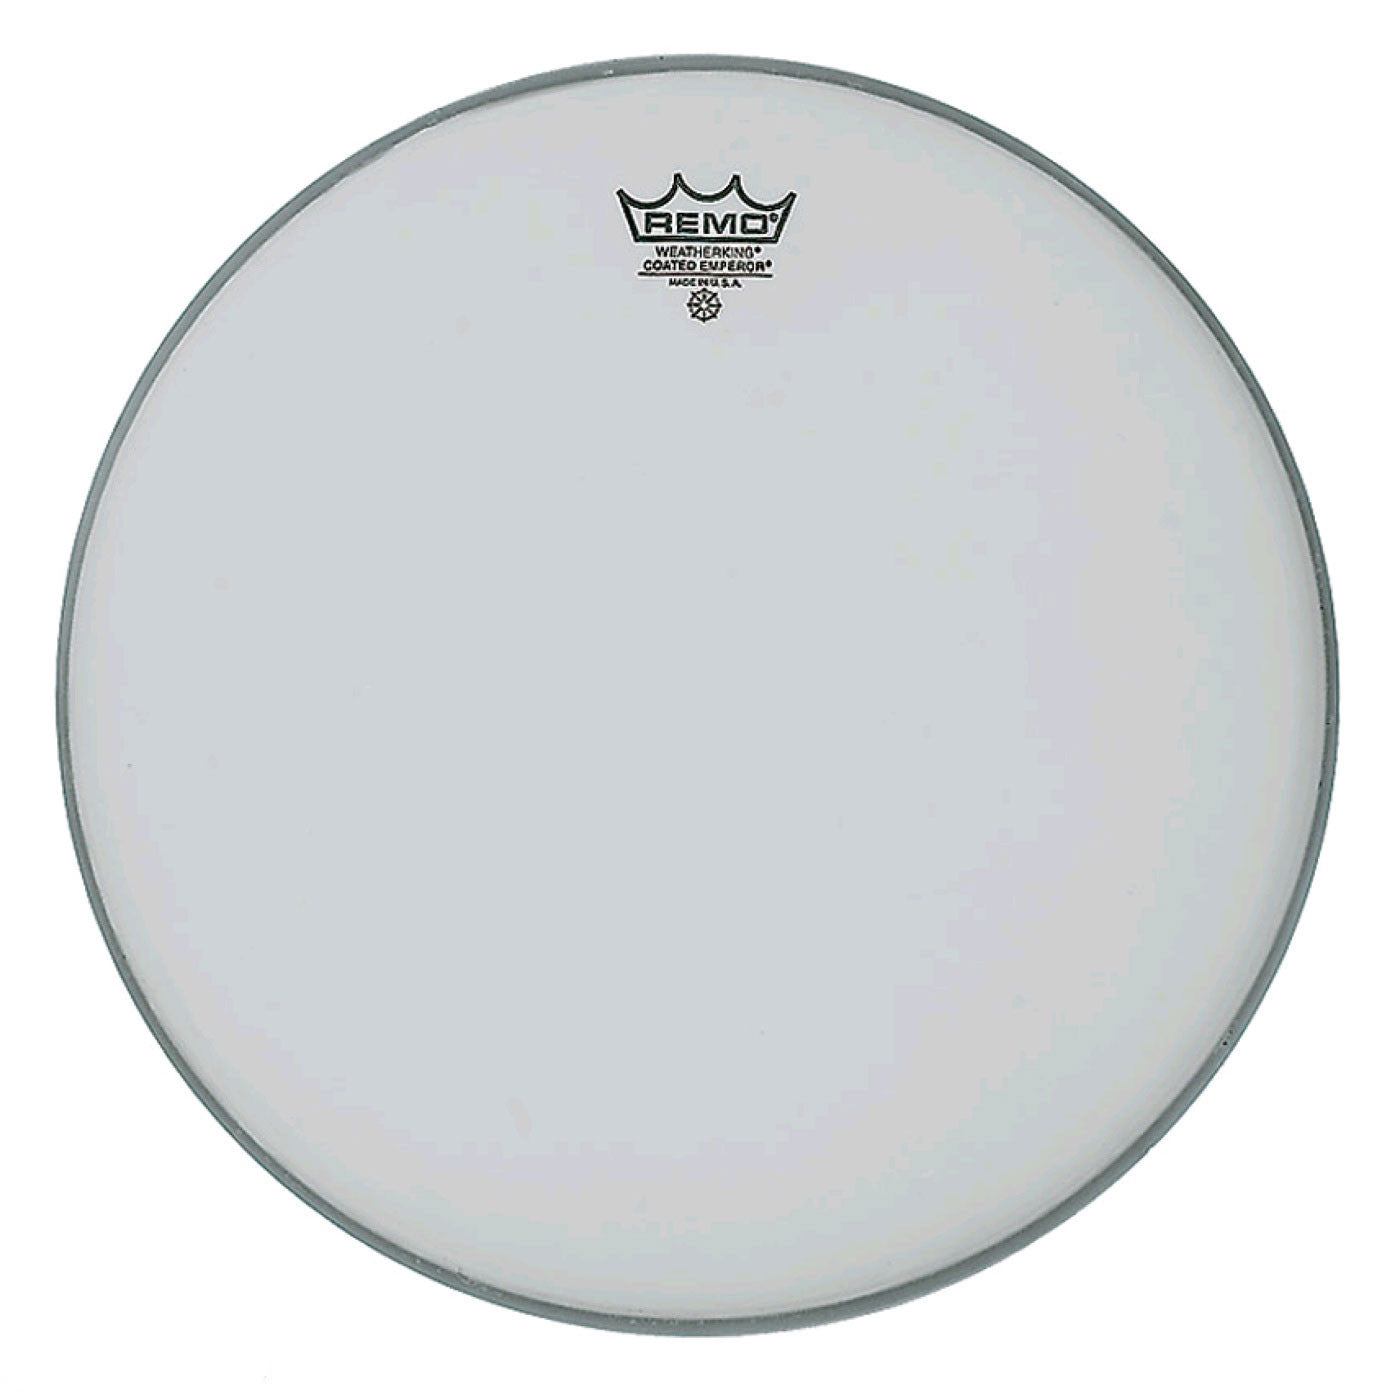 REMO | Emperor | 14" Coated Drum Head | Drum Skin | BE-0114-00 | Piano Time | South Melbourne